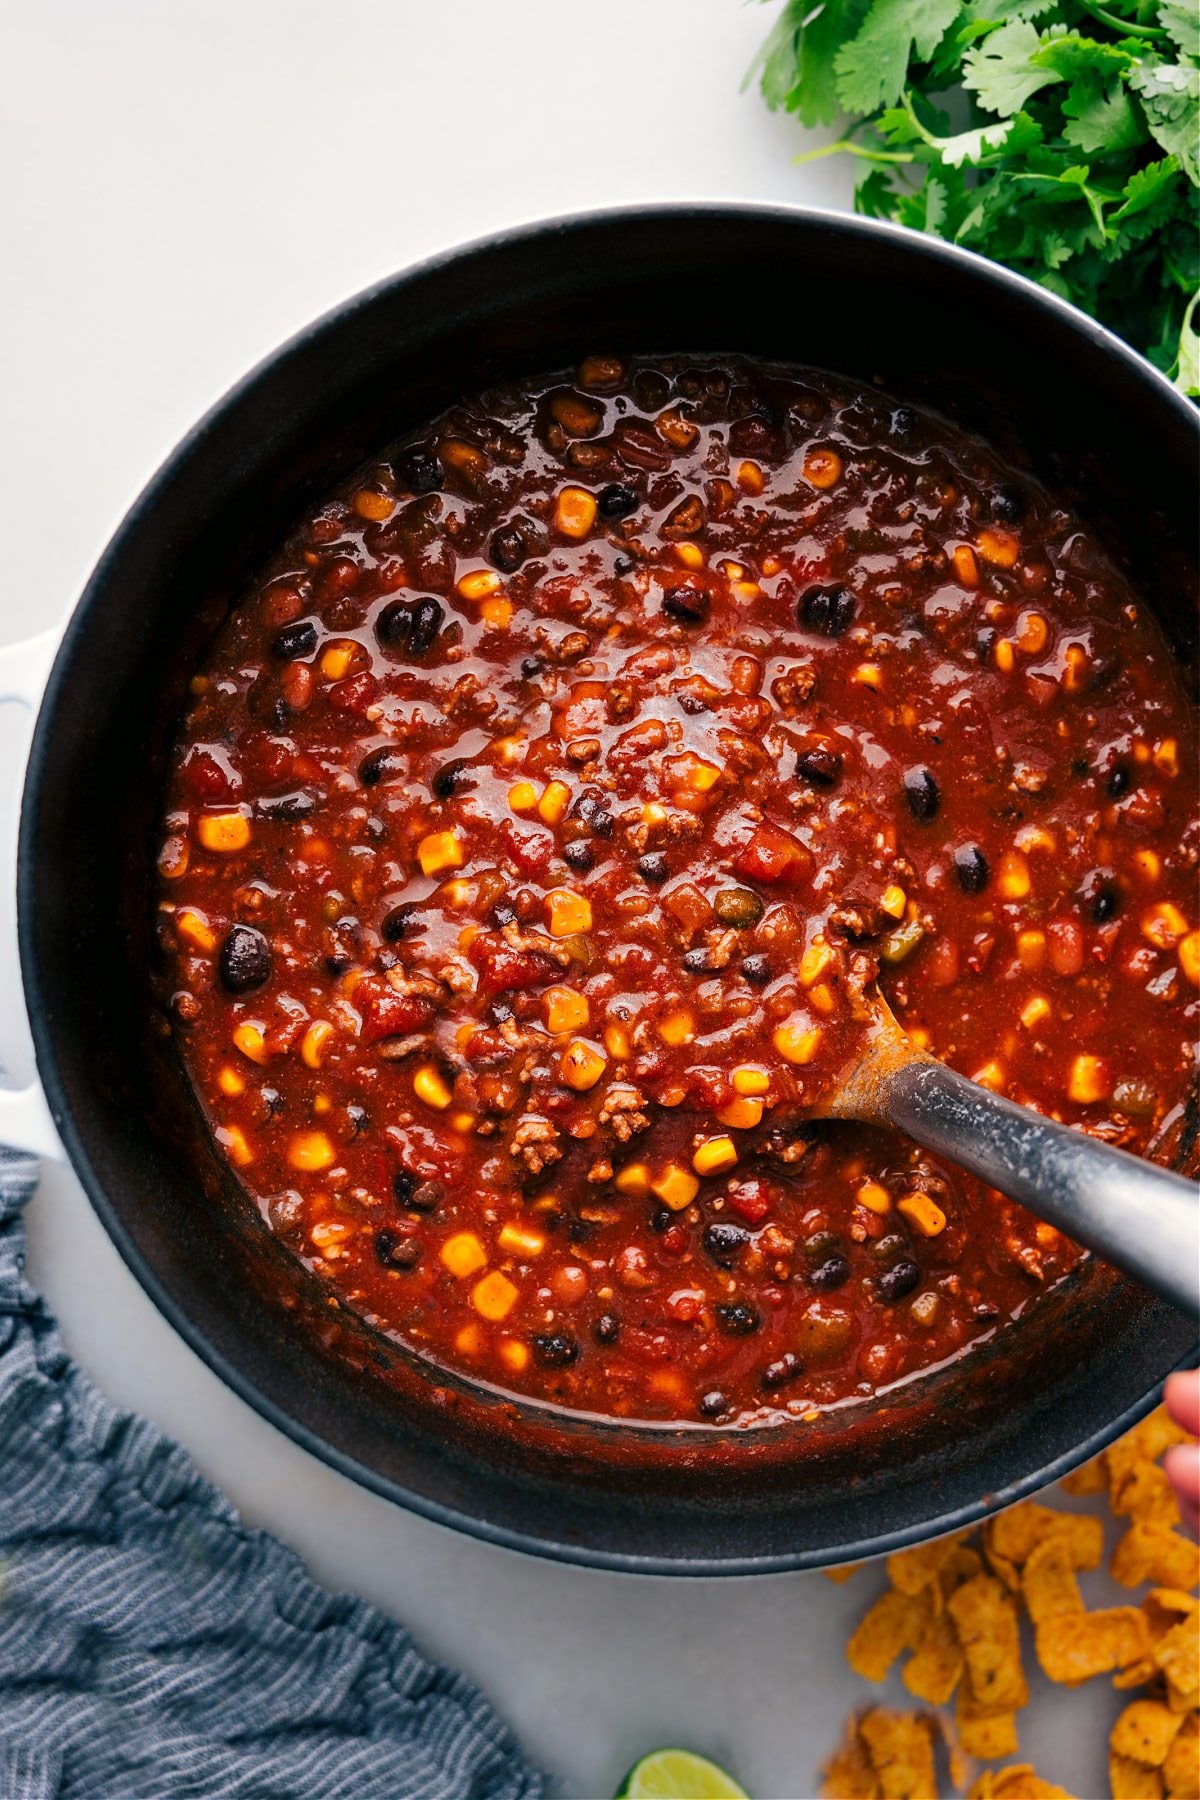 A mouthwatering bowl of Taco Soup, ready to be enjoyed.